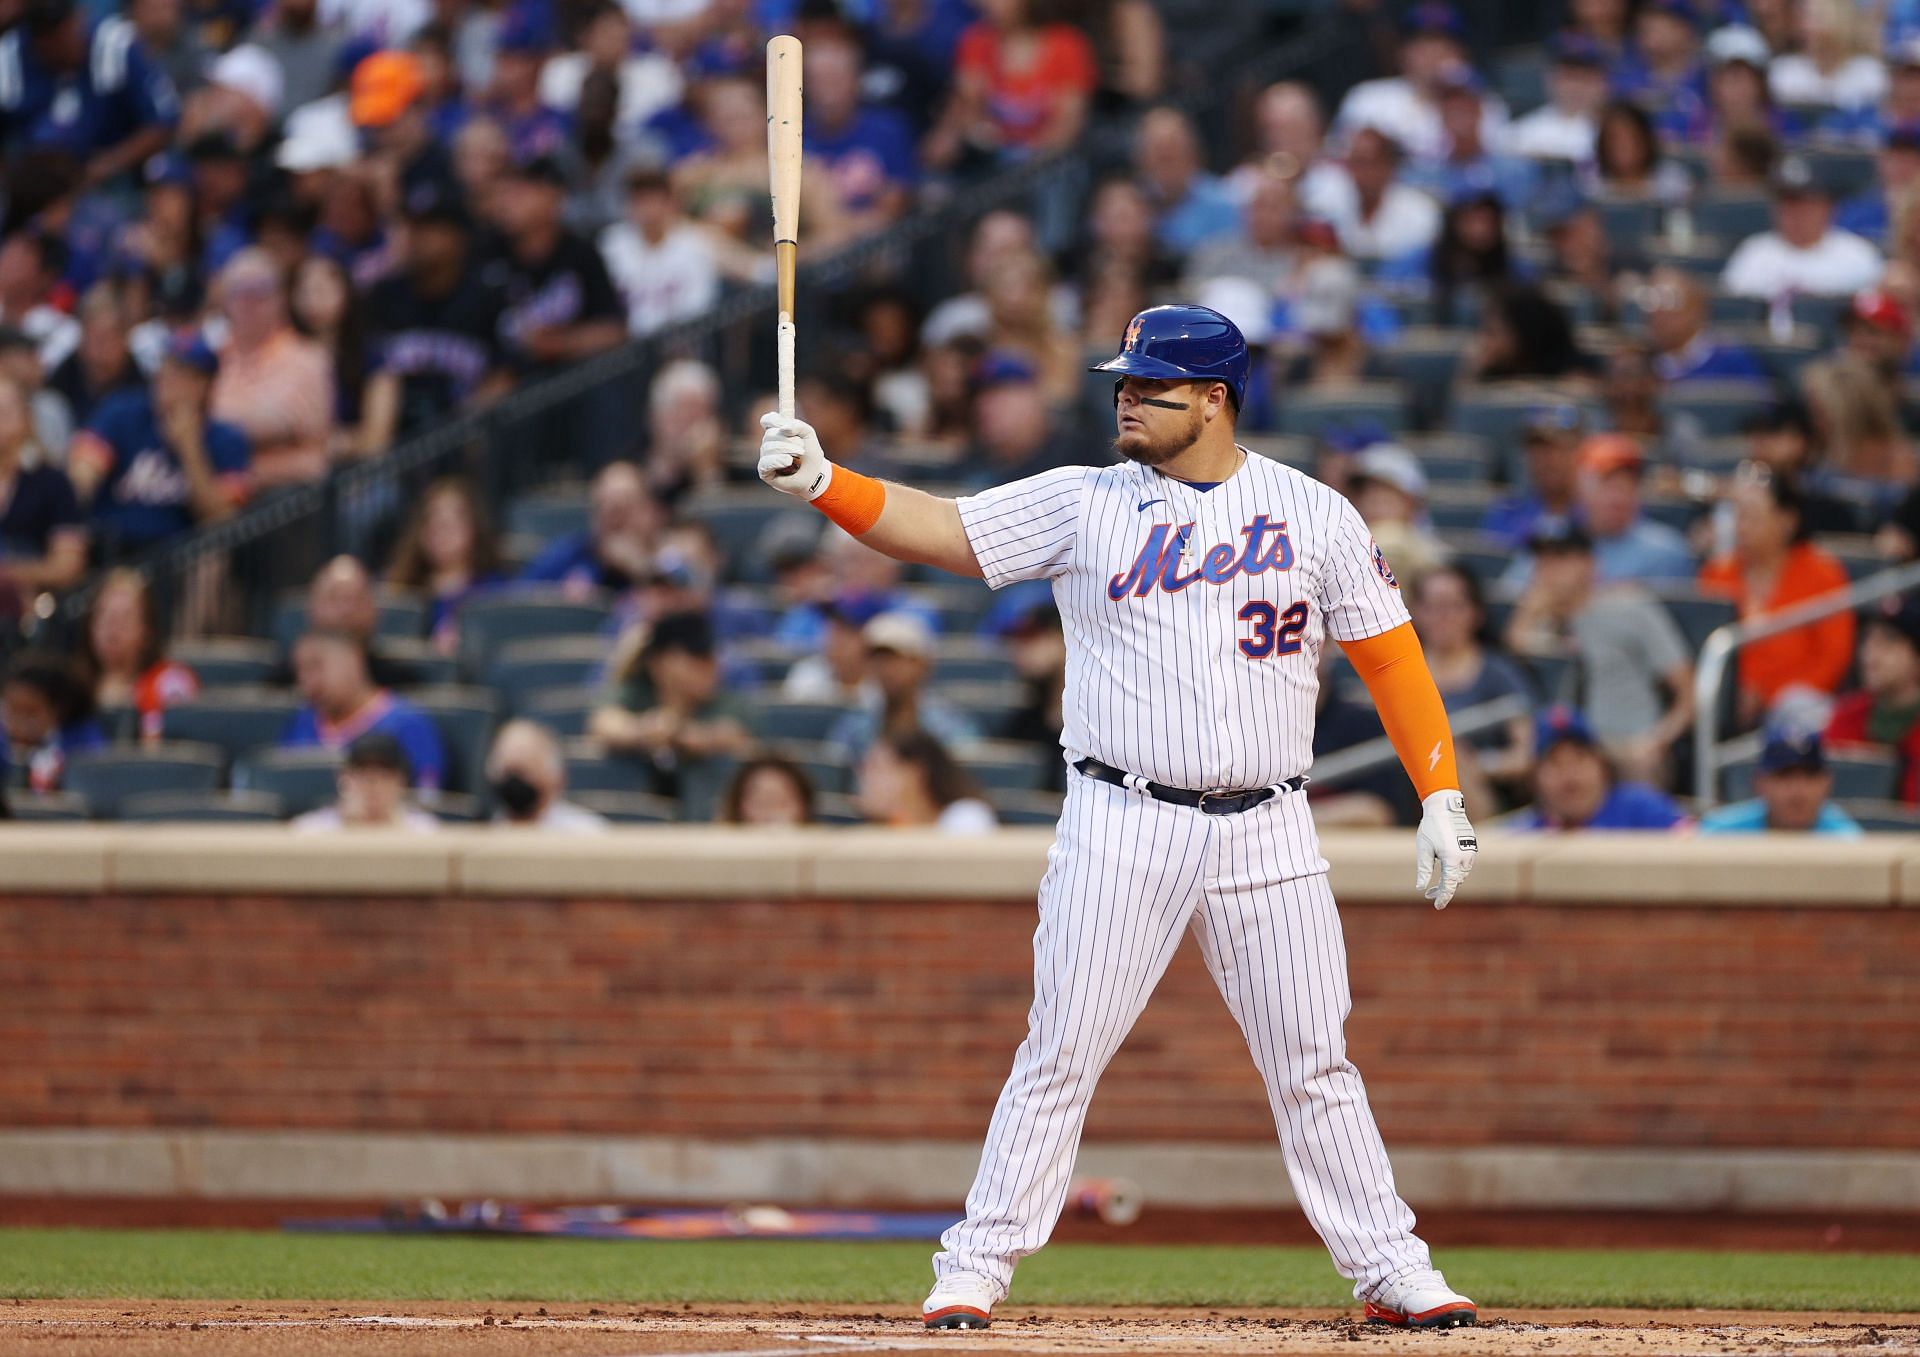 Vogelbach has a batting average of .269 since joining the Mets.